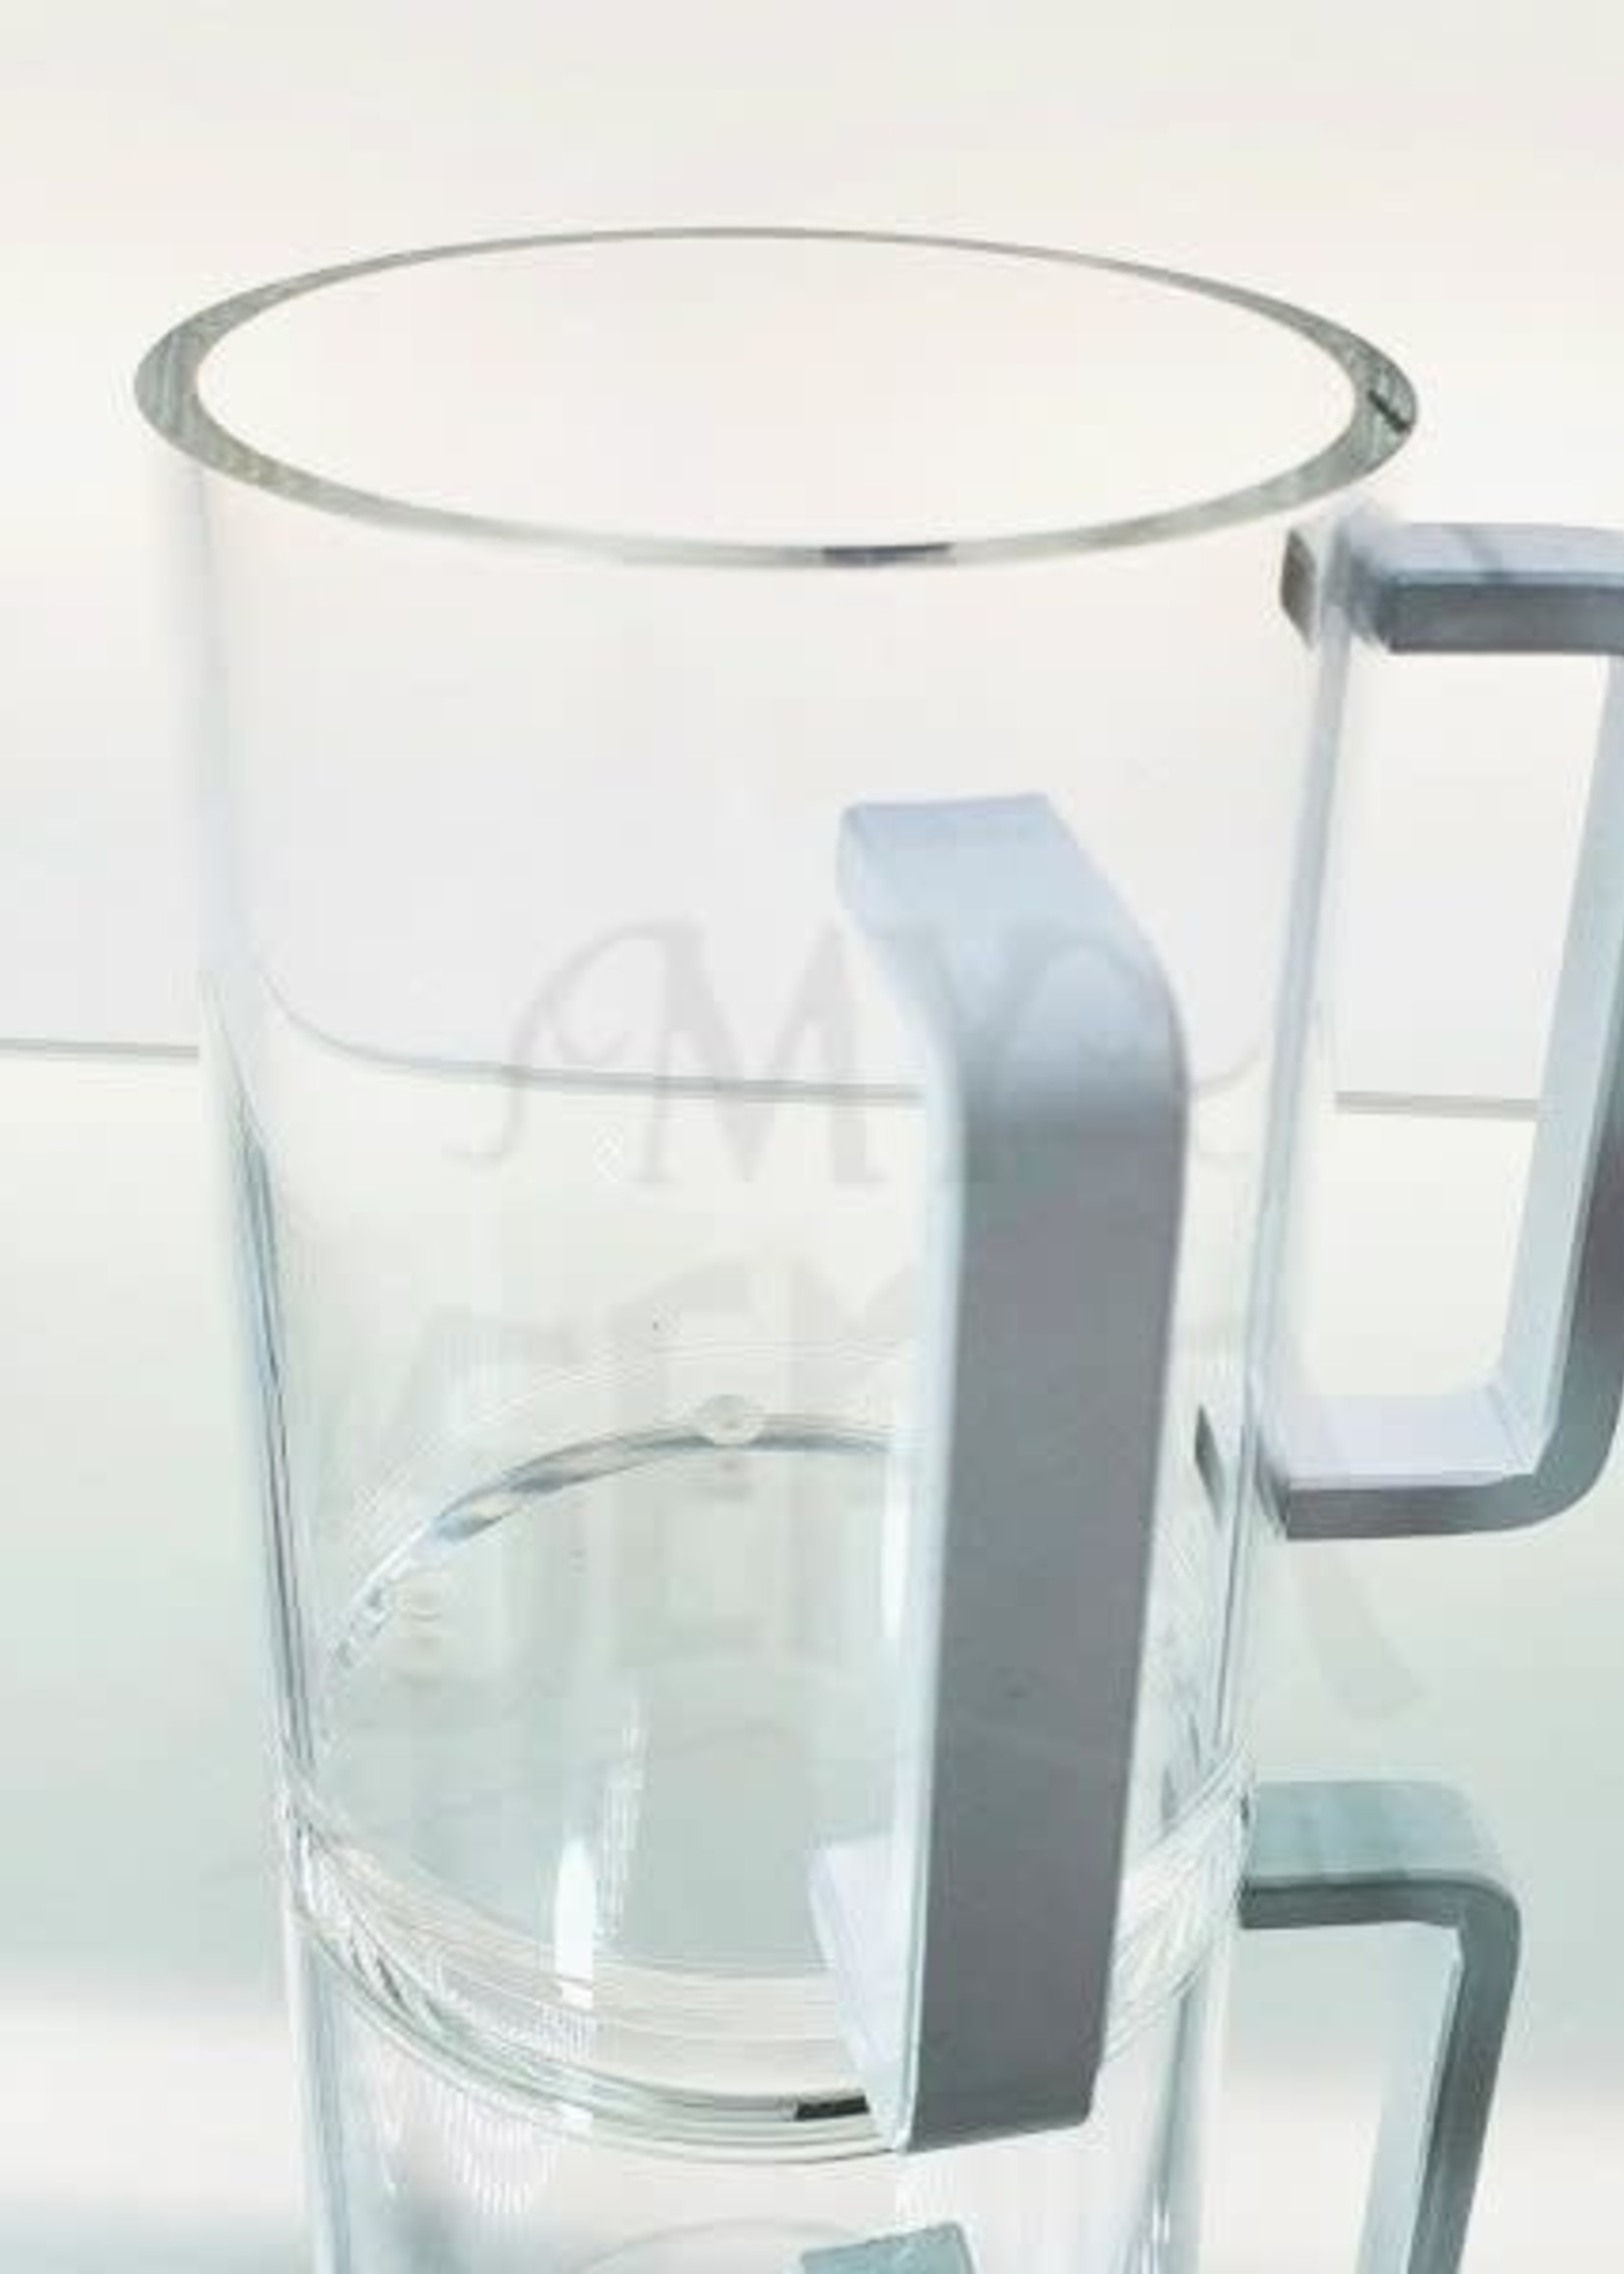 Clear Acrylic Washing Cup-White Handles 5"